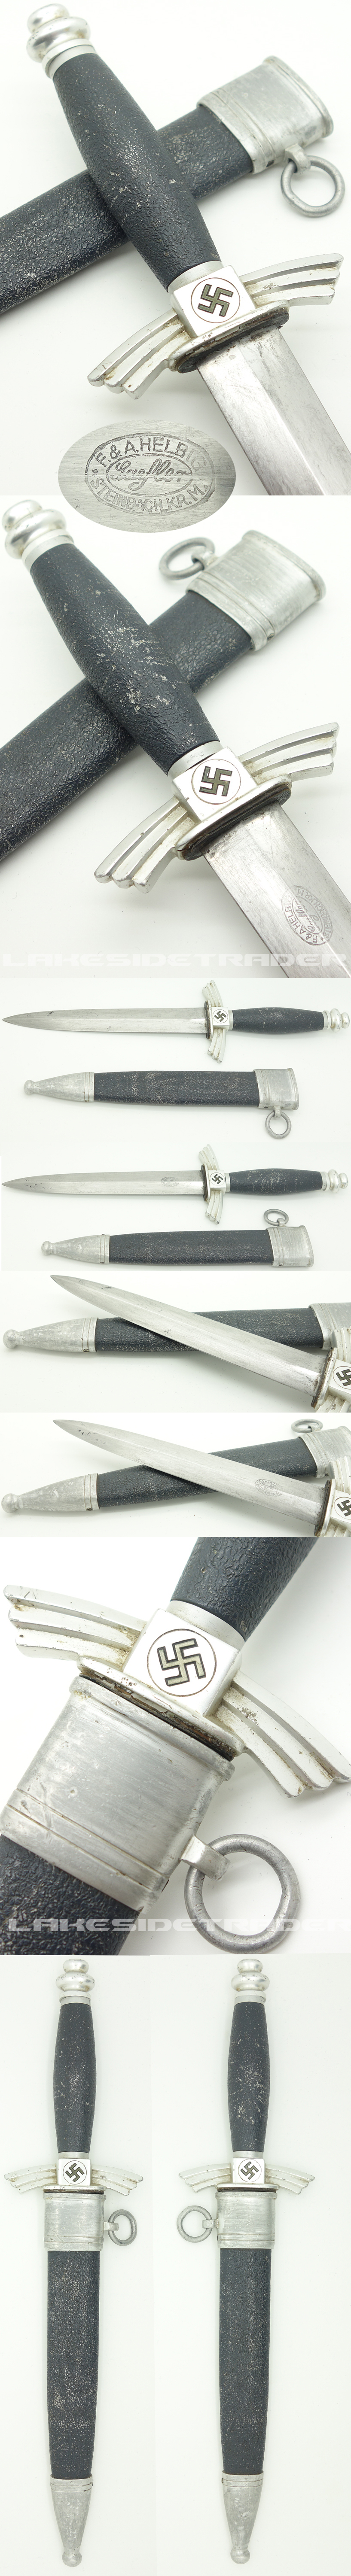 NSFK Dagger by Helbig